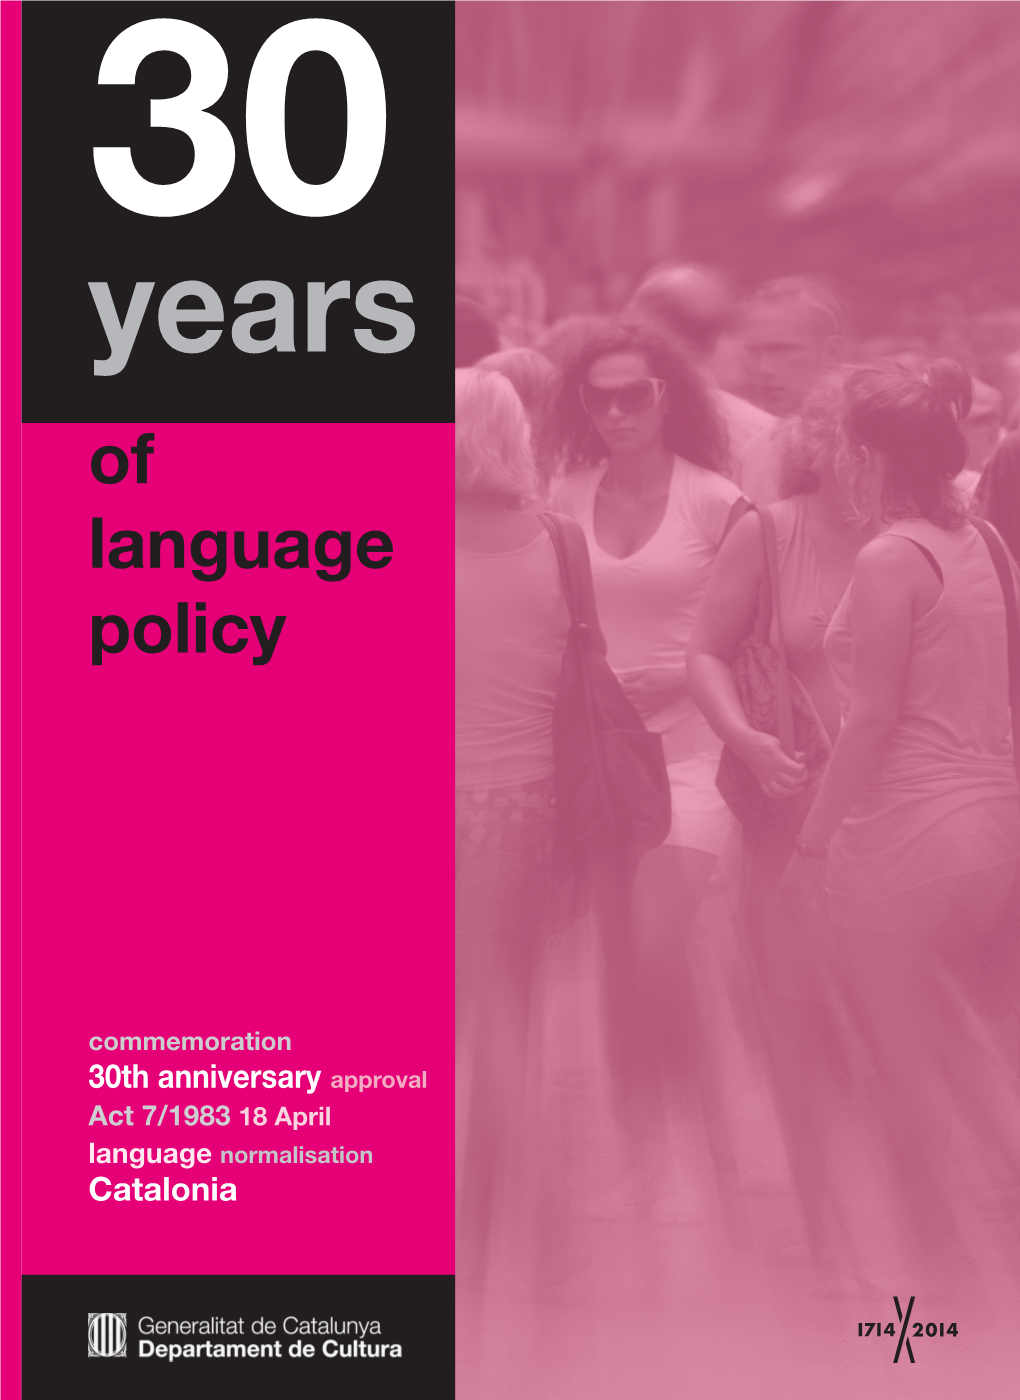 30 Years of Language Policy